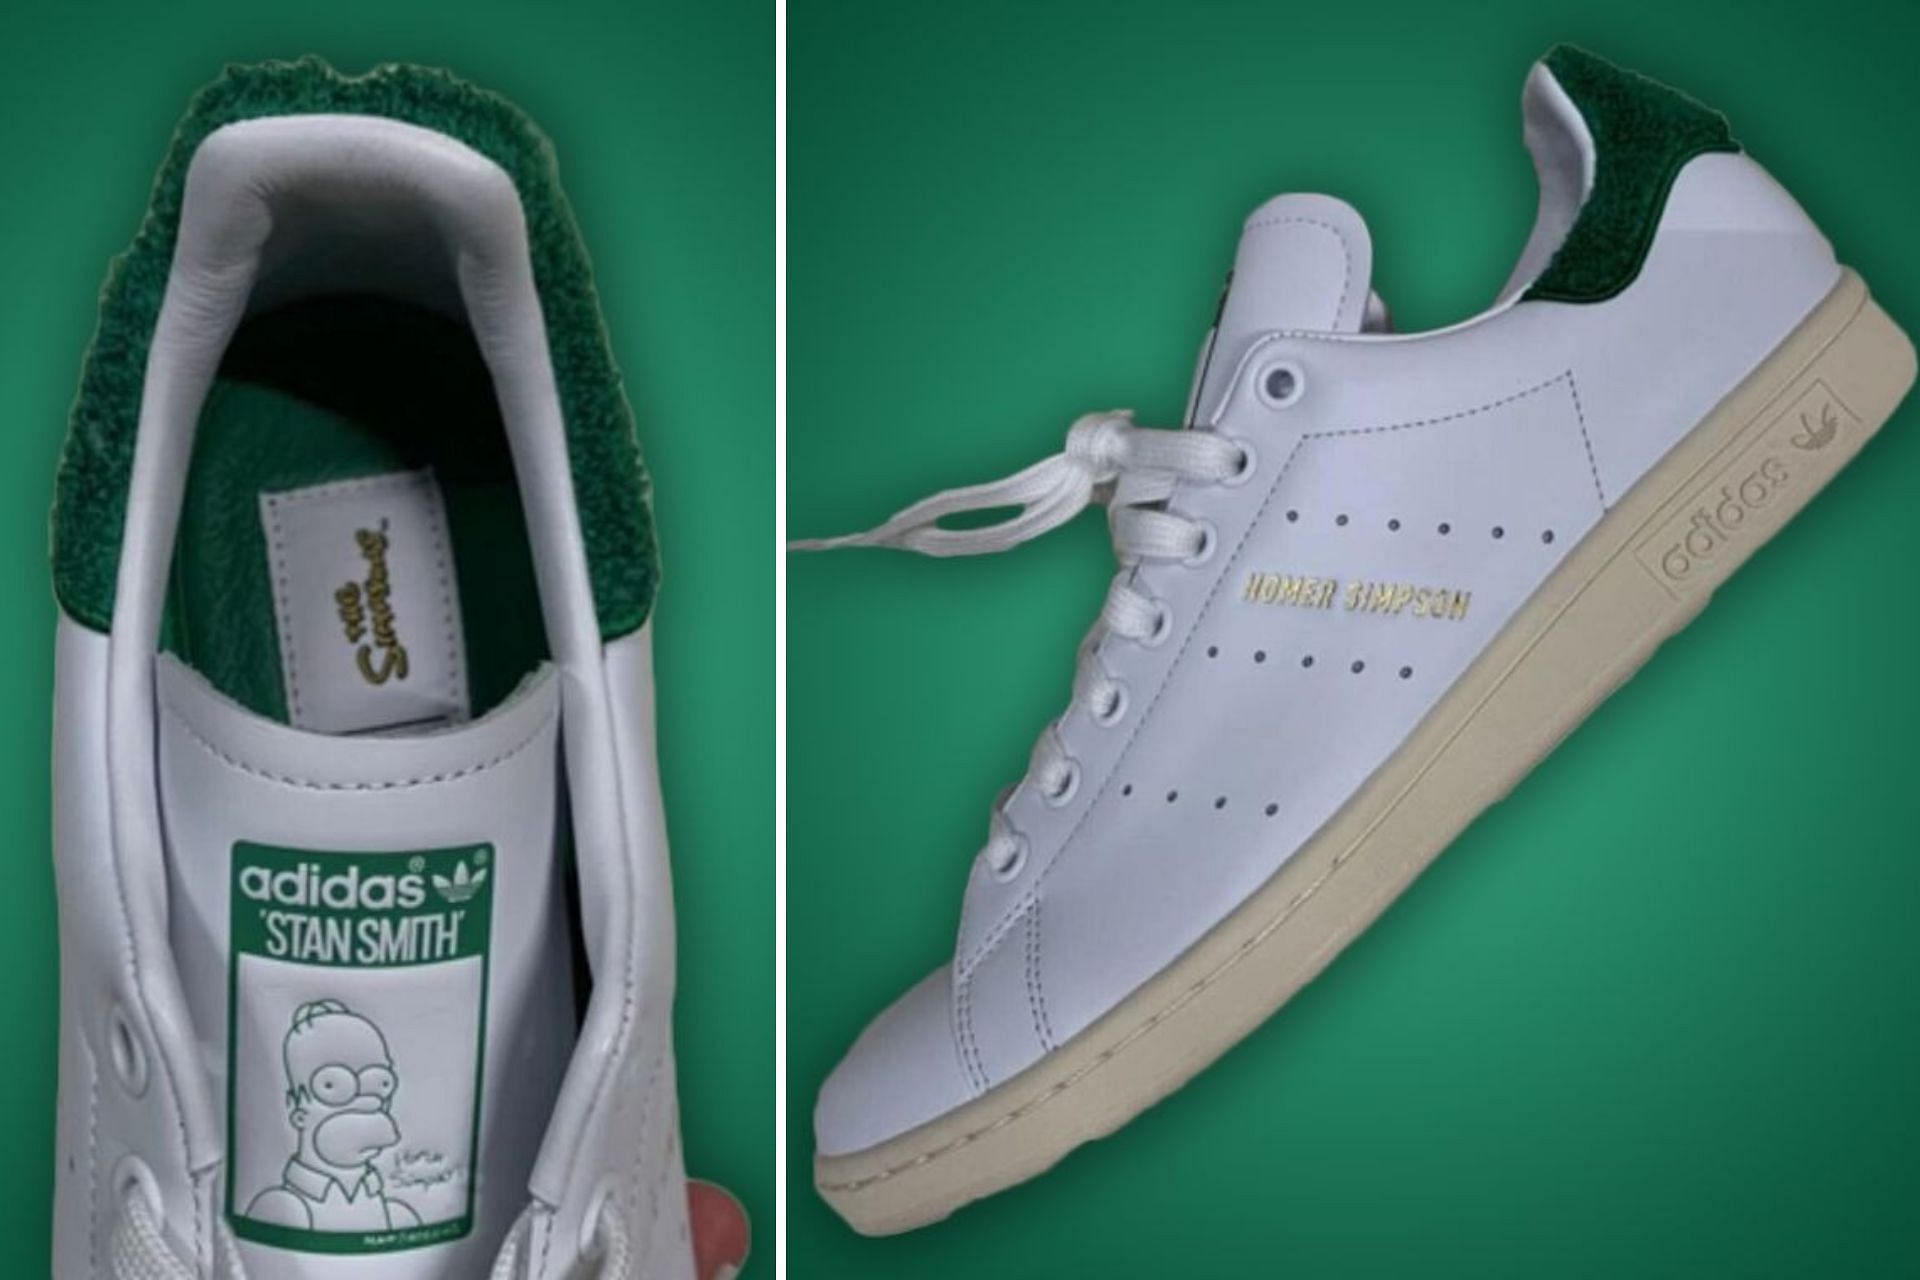 Take a closer at the Adidas Stan Smith shoes (Image via Instagram/@brkicks)